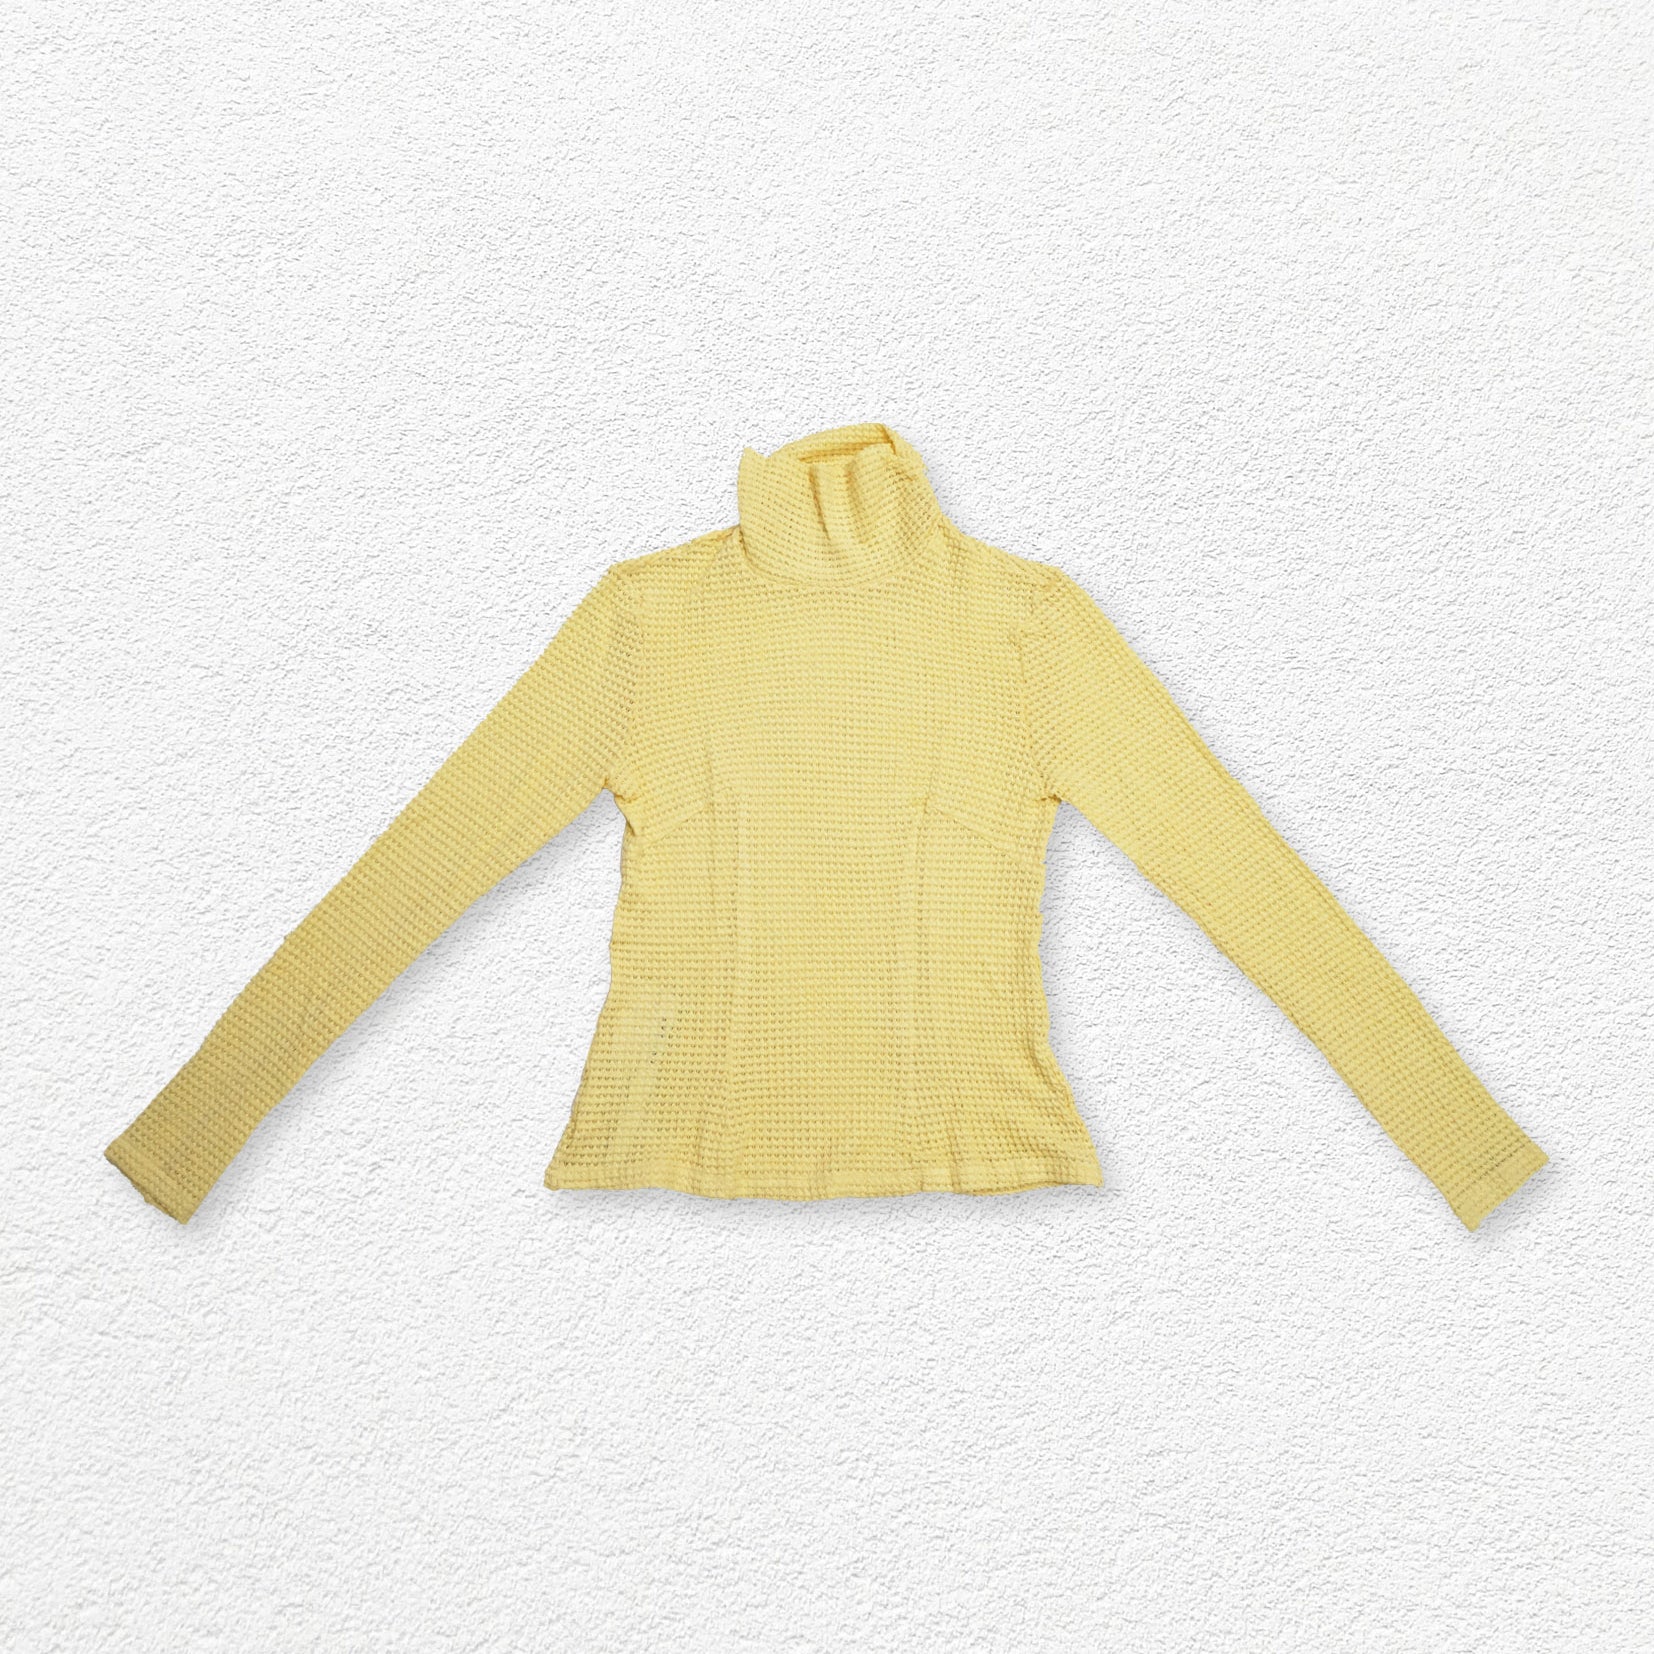 Turtleneck knit top in daisy yellow